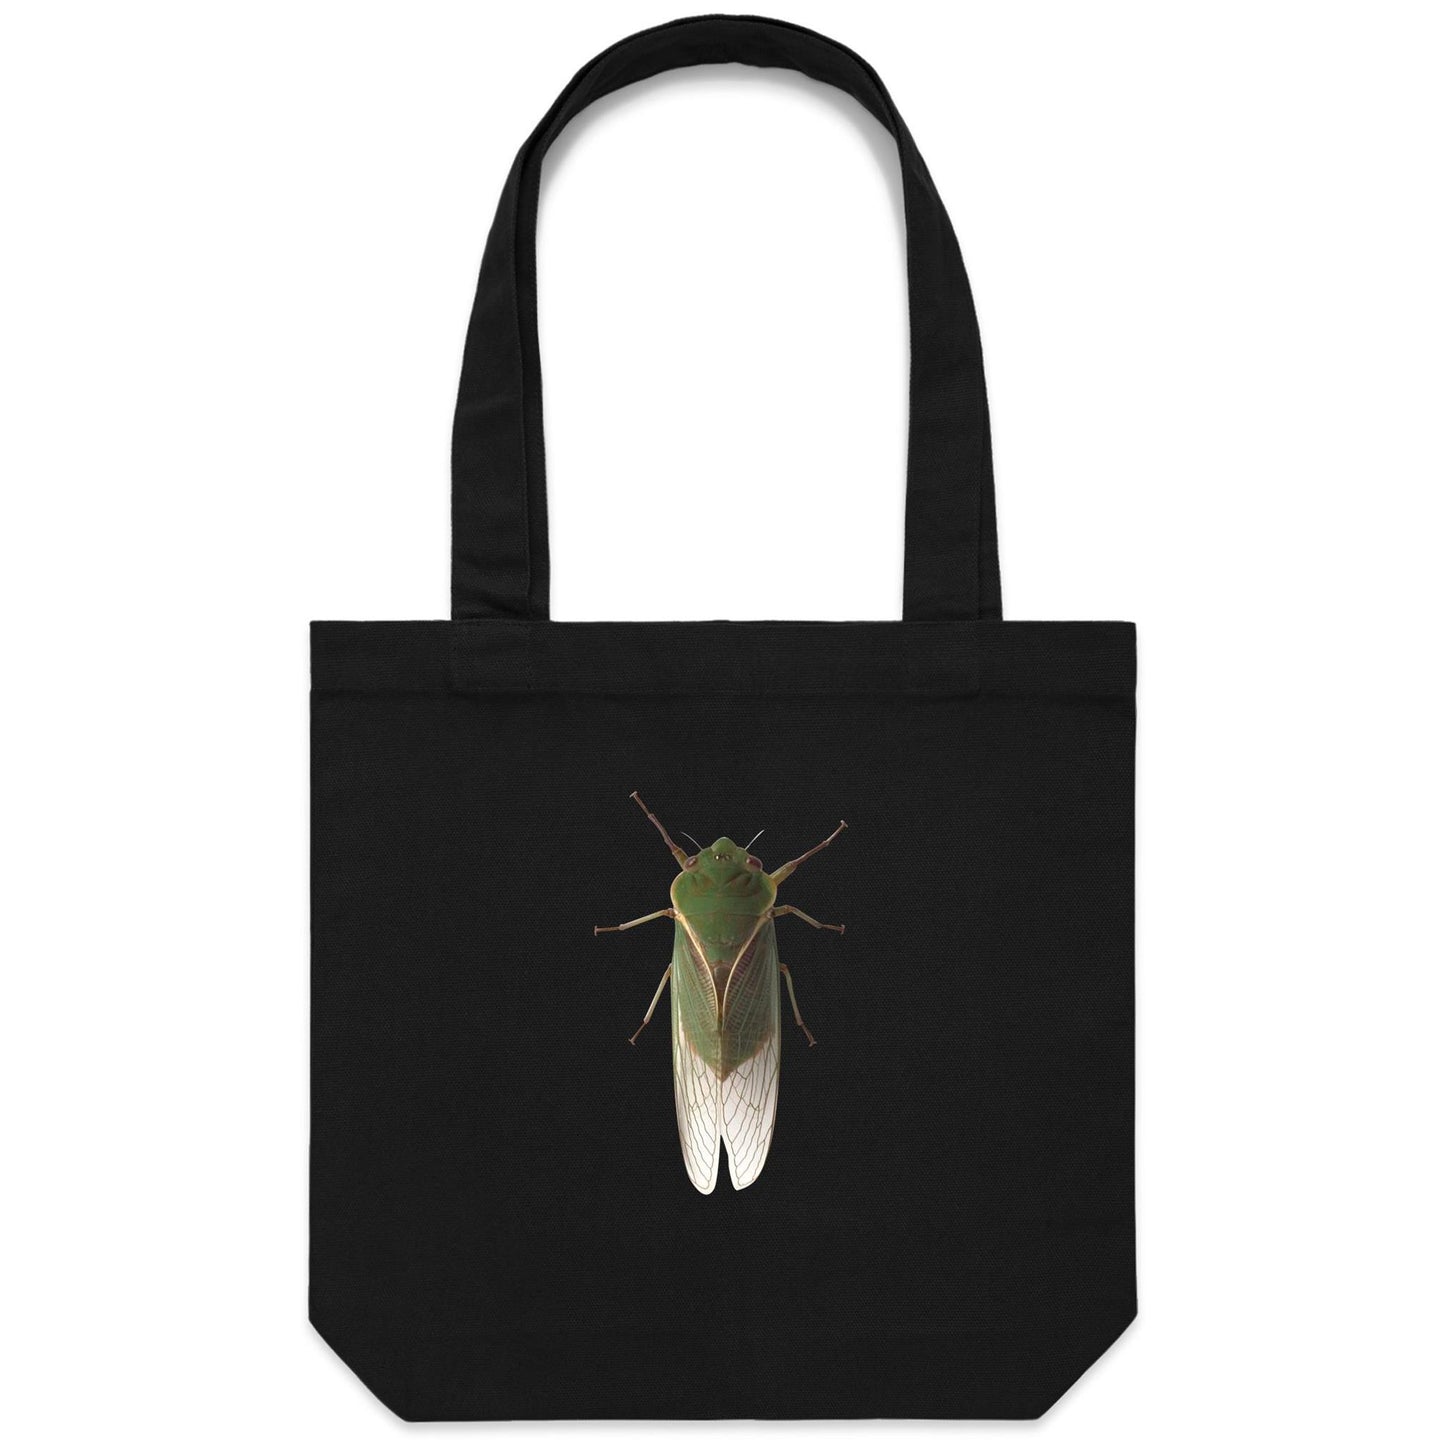 The Little Guy Canvas Totes